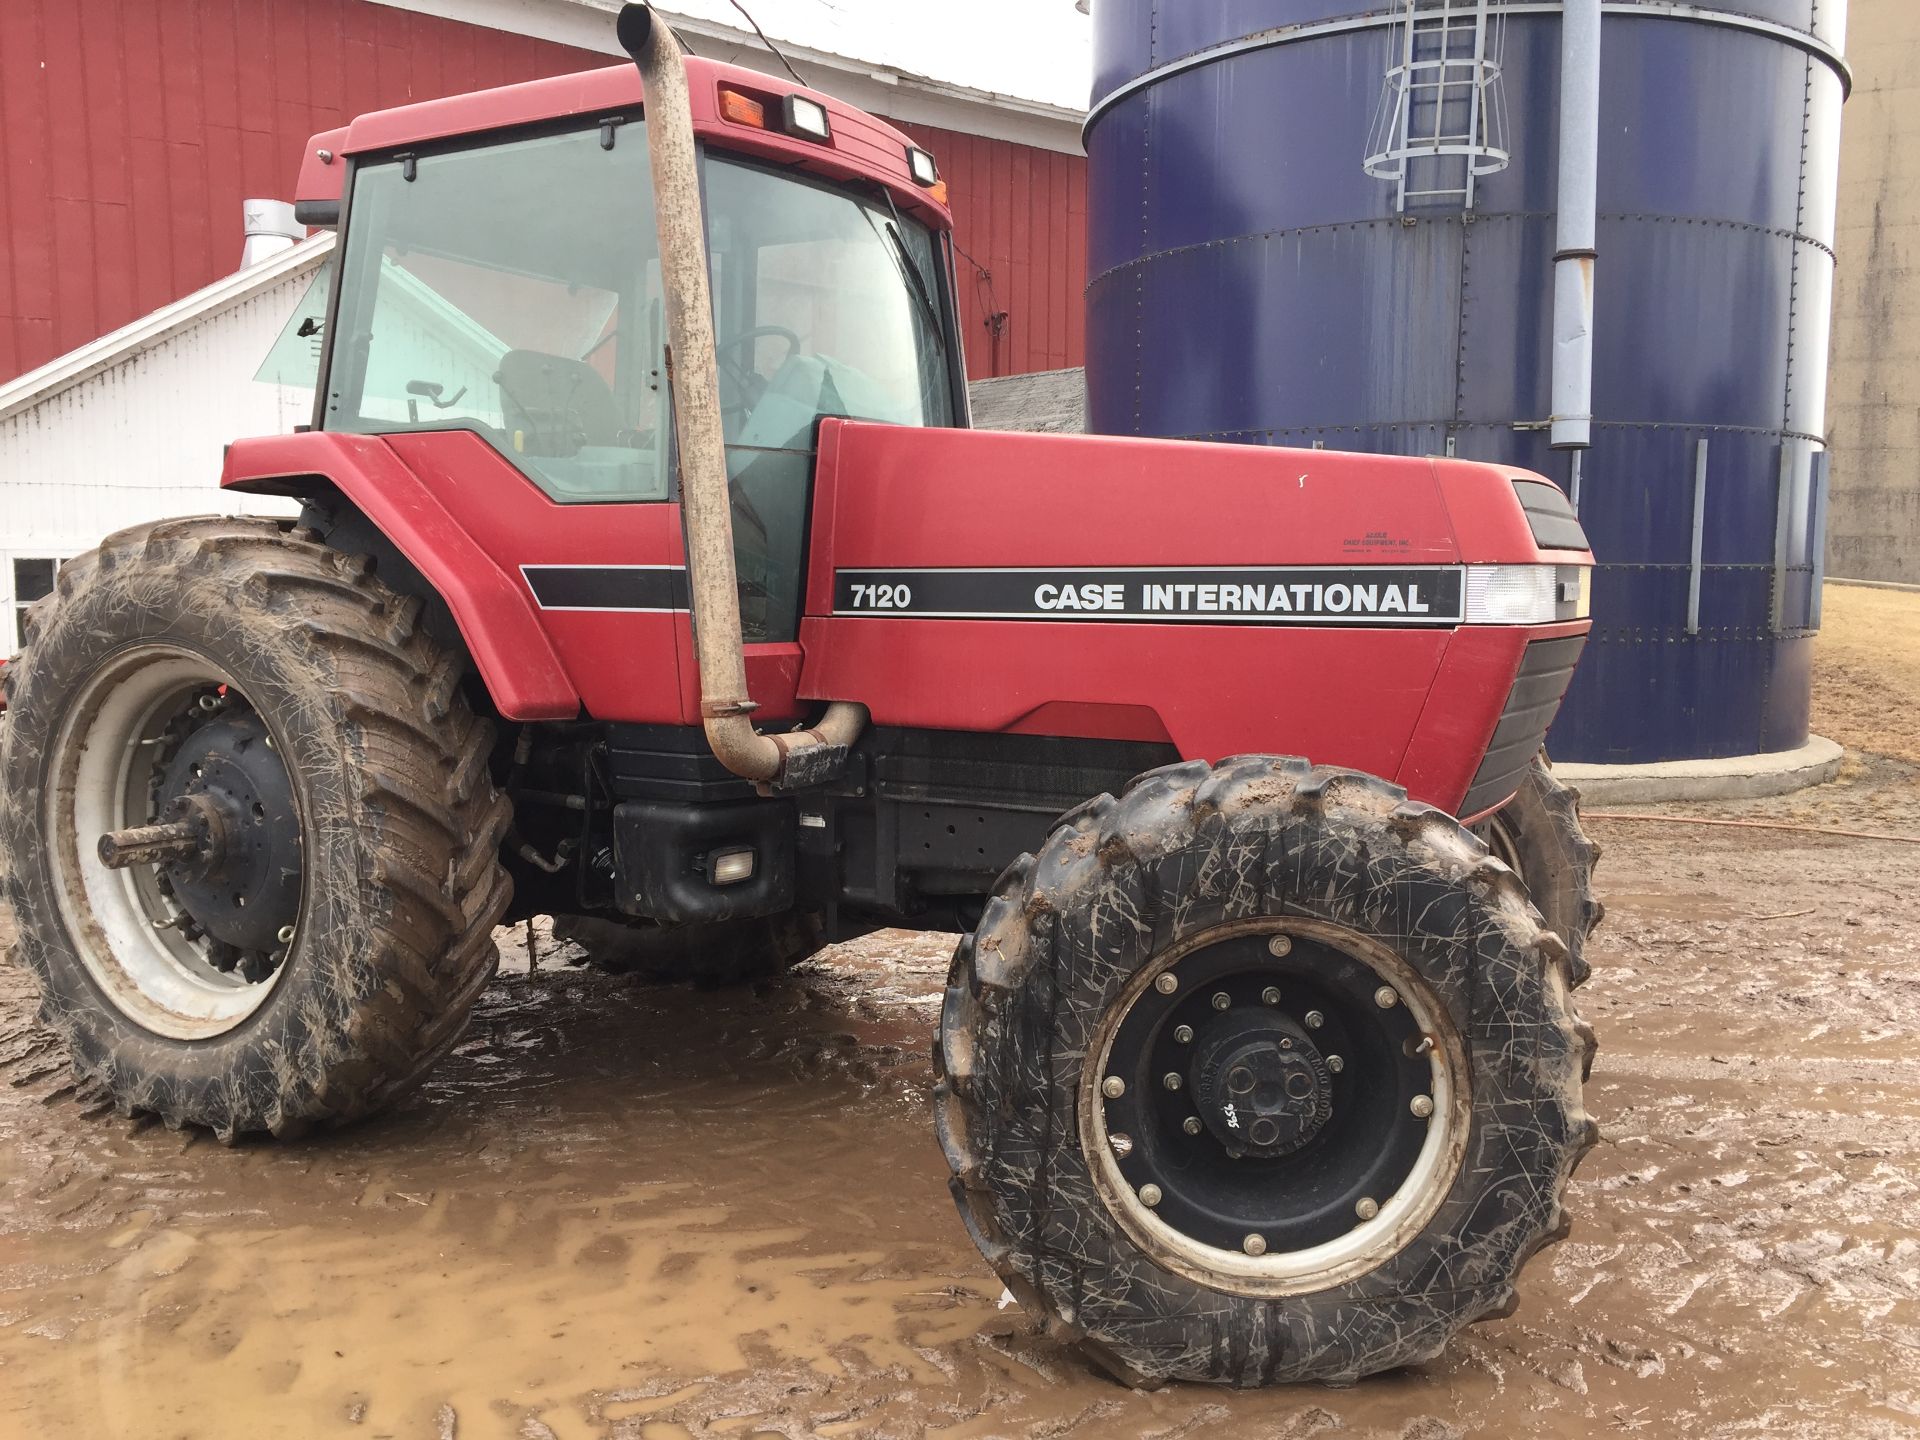 7120 Case International 4x4 Tractor ~7100hrs - not sold w/ quick hitch pictured - Image 2 of 22